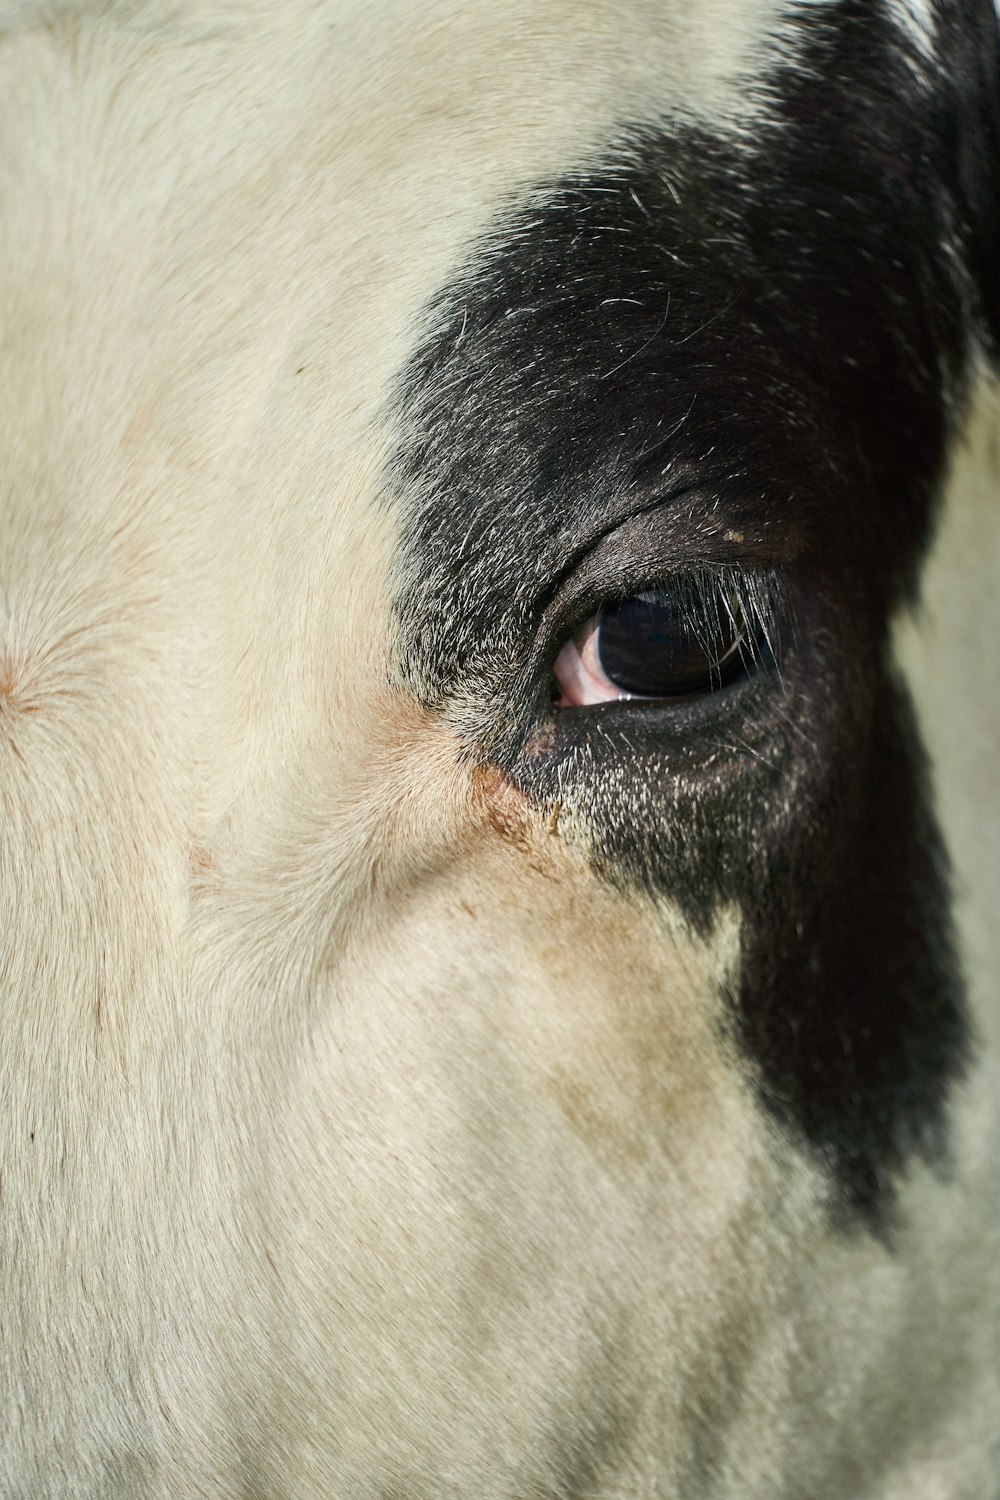 a close up of a black and white cow's eye